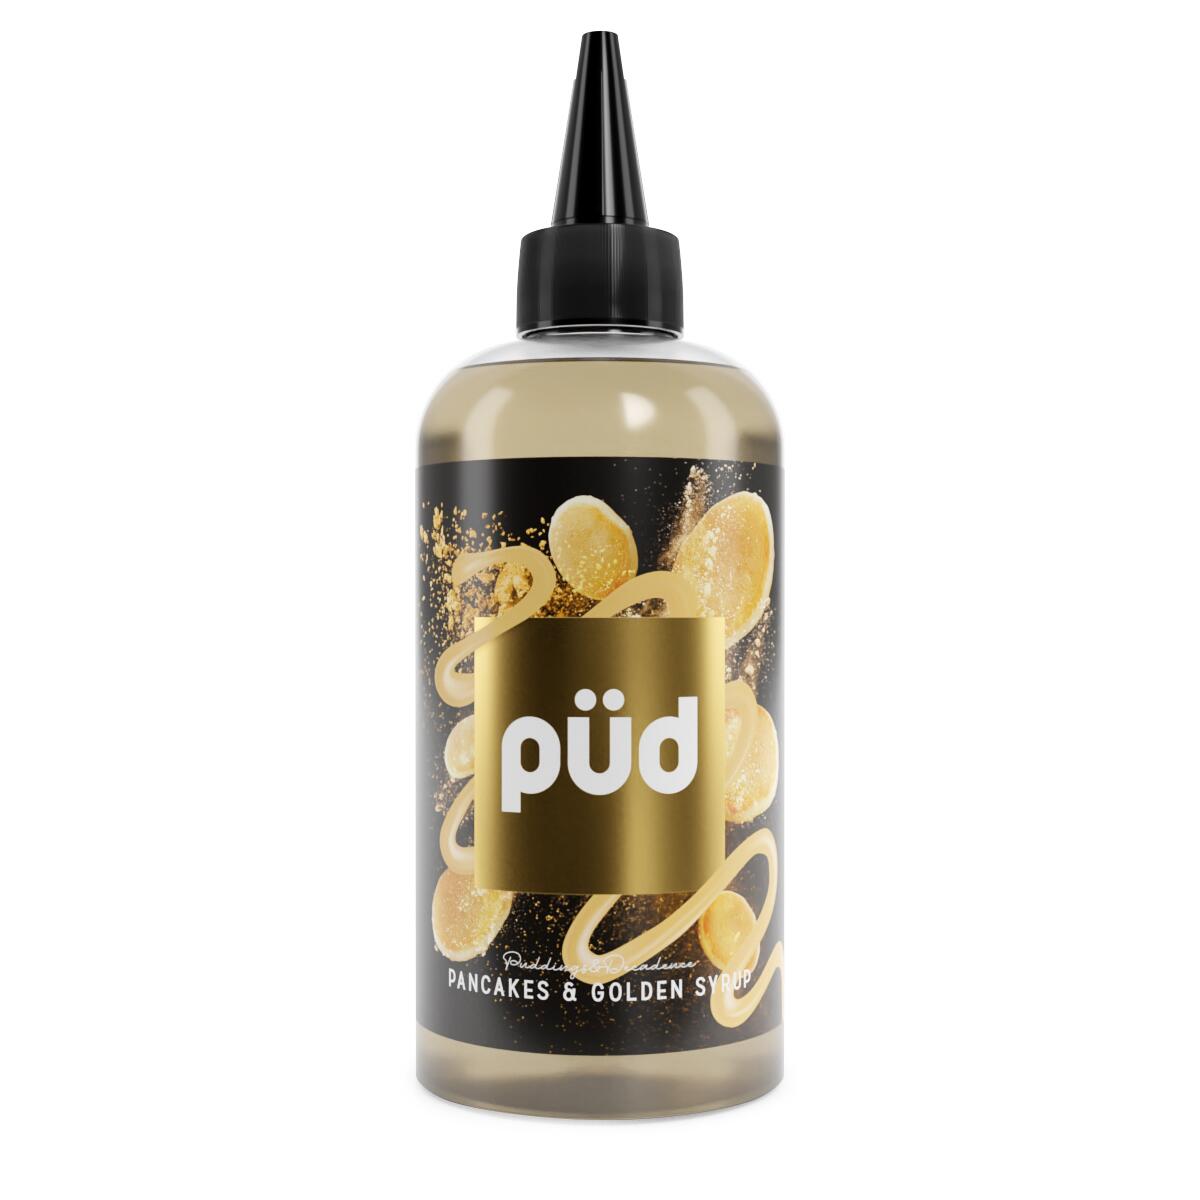 Pancakes & Golden Syrup E-Liquid by PUD